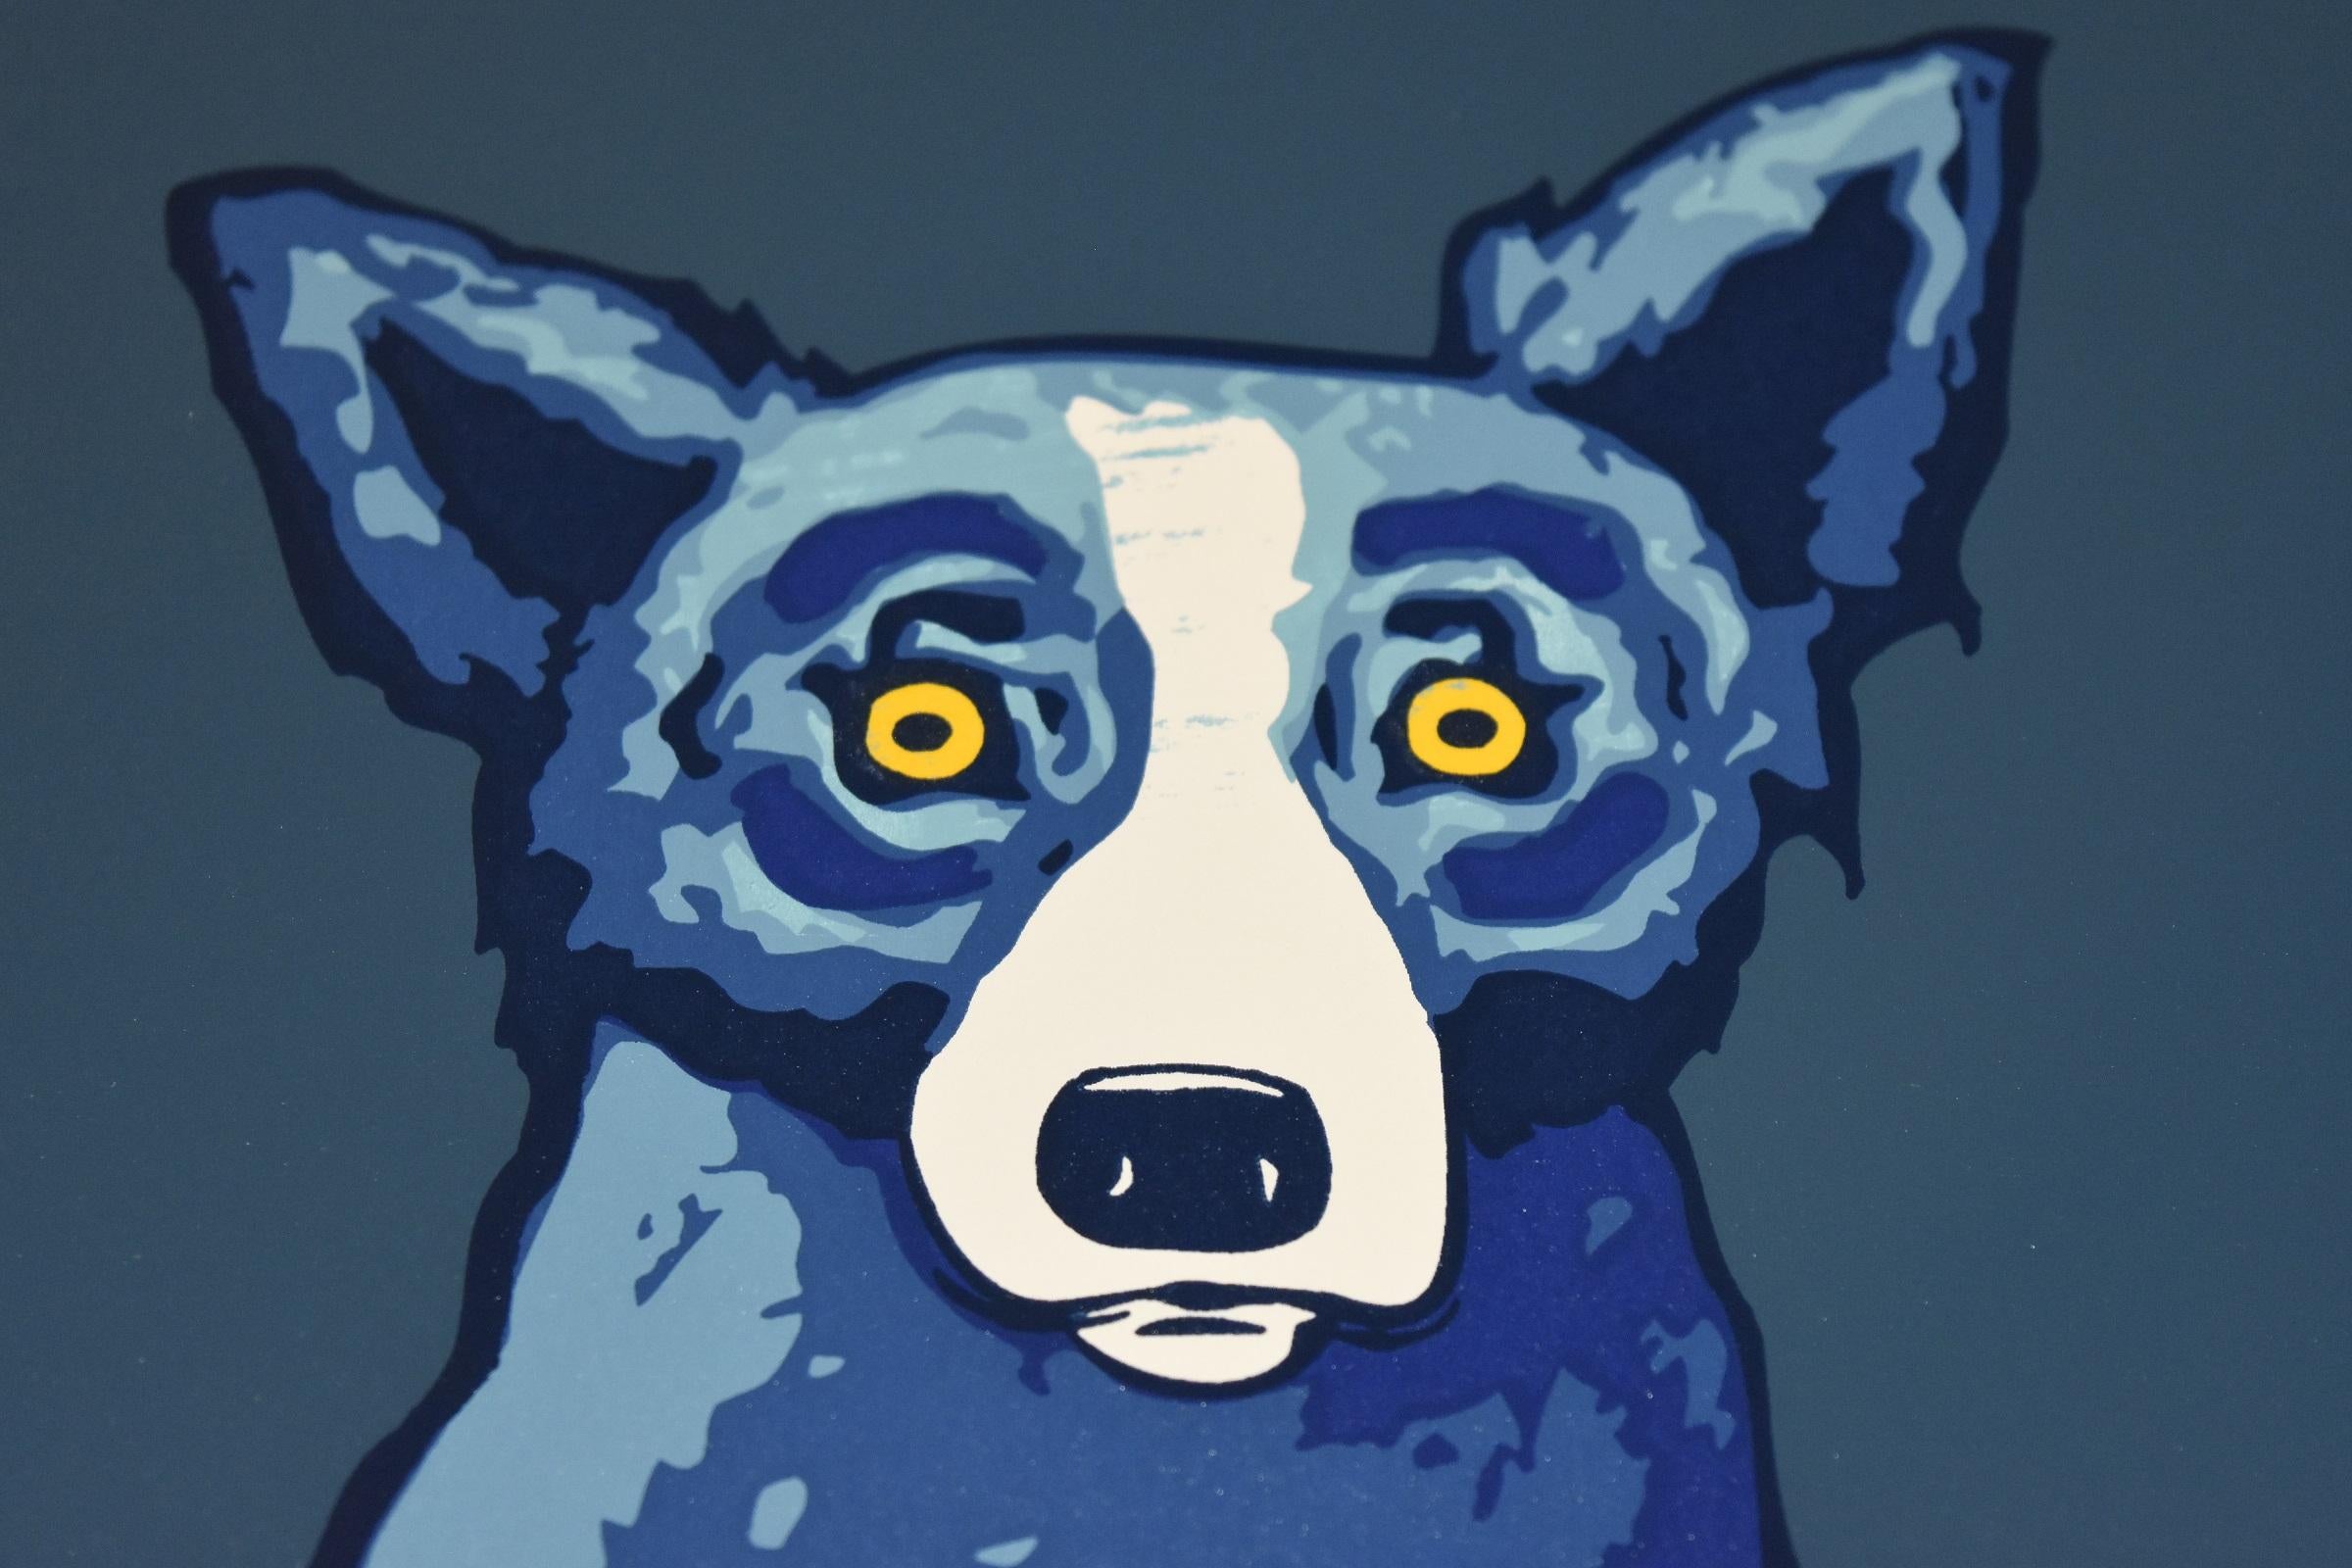 This Blue Dog work consists of one dog sitting center on a cobalt blue background.  The dog has soulful yellow eyes.  This pop art animal original silkscreen print on paper is guaranteed authentic and is hand signed by the artist.

Artist:  George